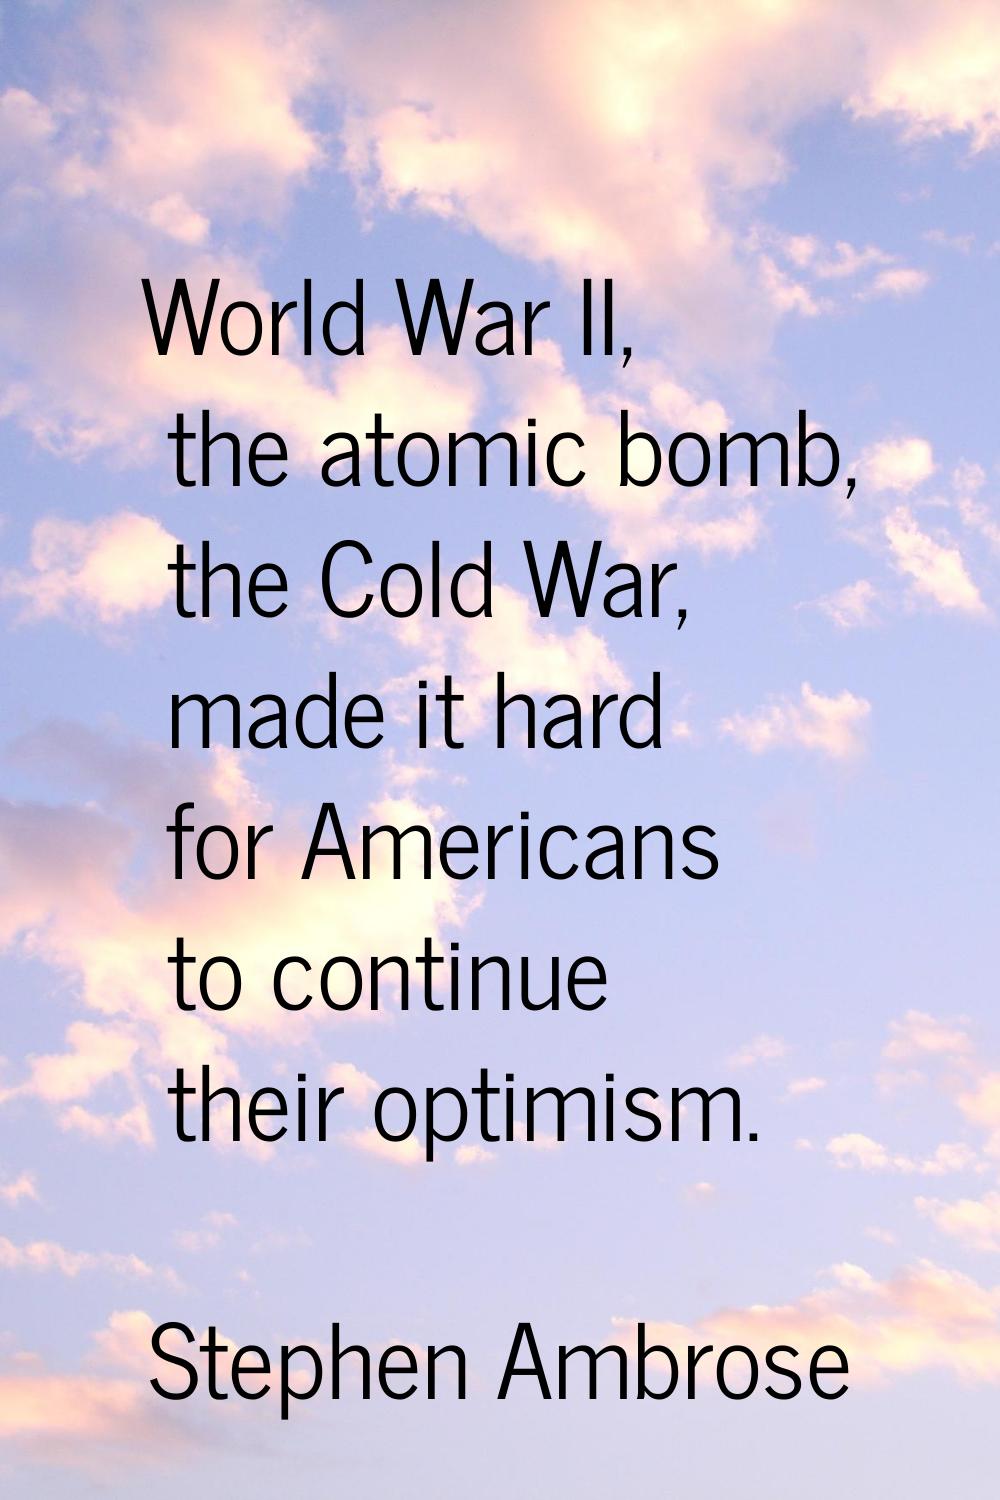 World War II, the atomic bomb, the Cold War, made it hard for Americans to continue their optimism.